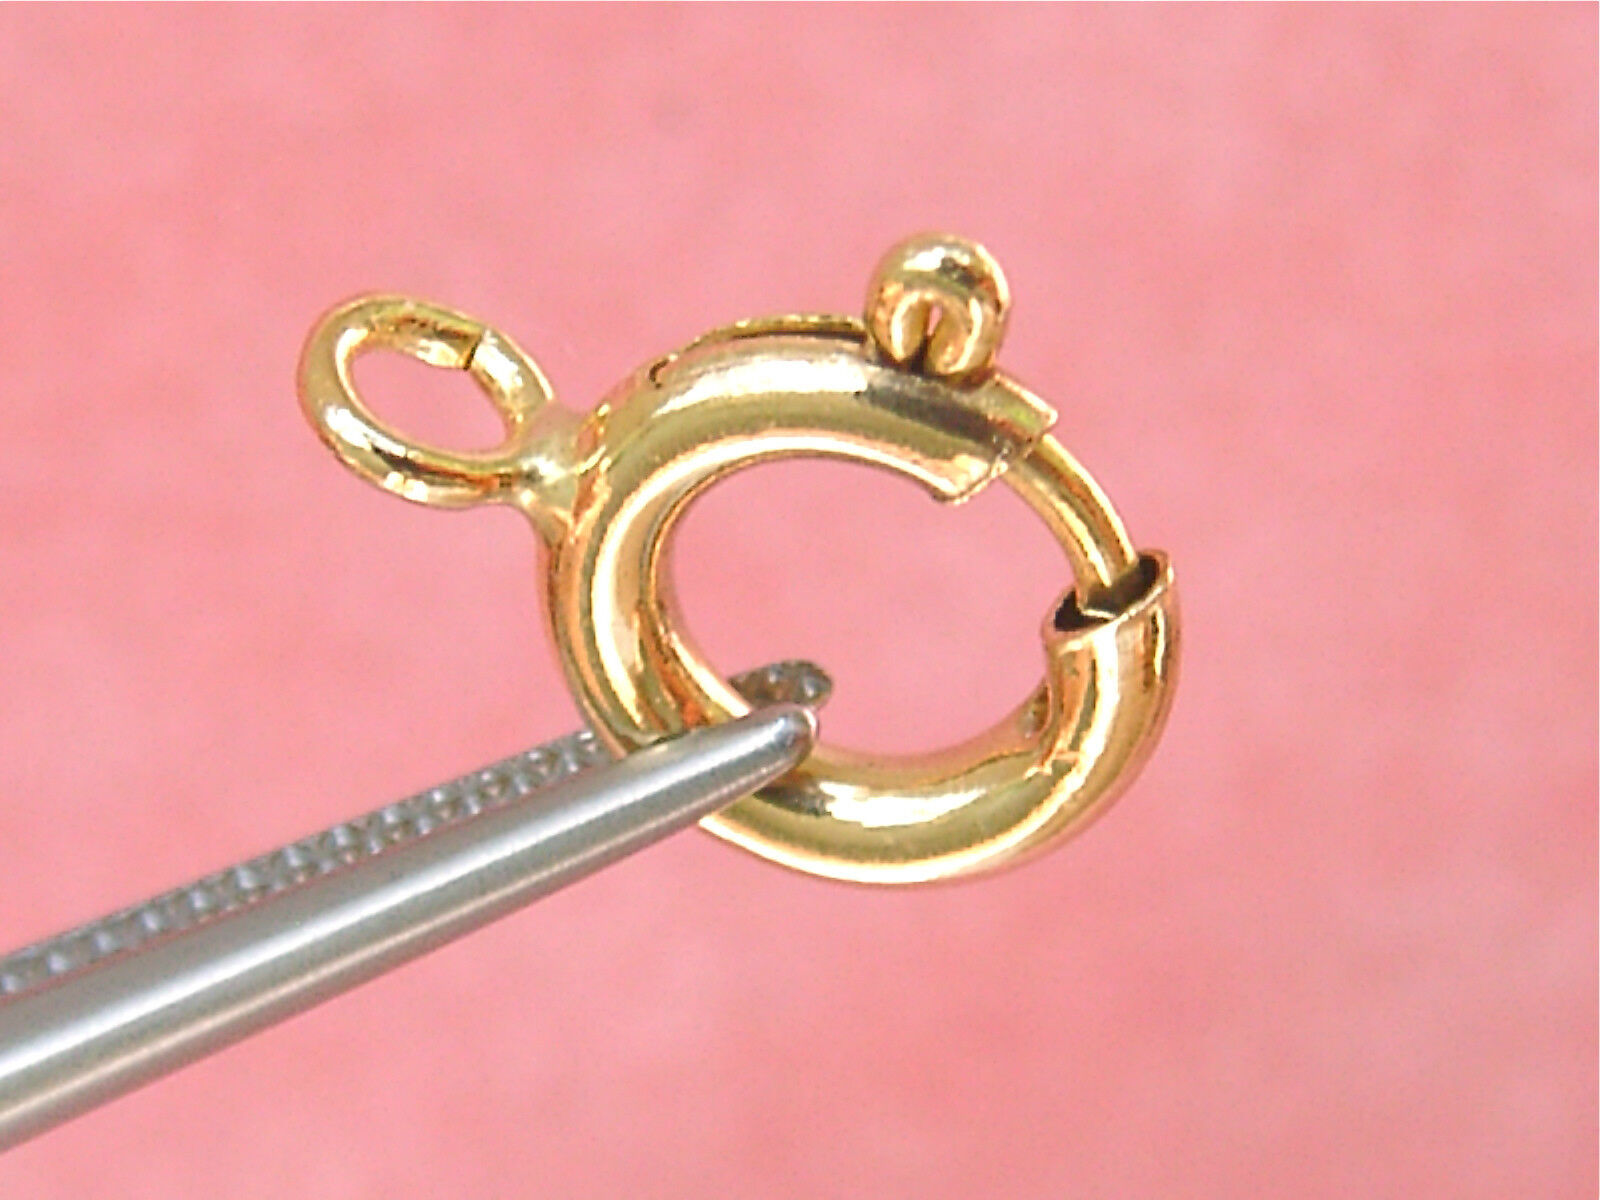 SOLID 14K YELLOW GOLD 10 mm SPRING RING NECKLACE CLASP with OPEN JUMP RING